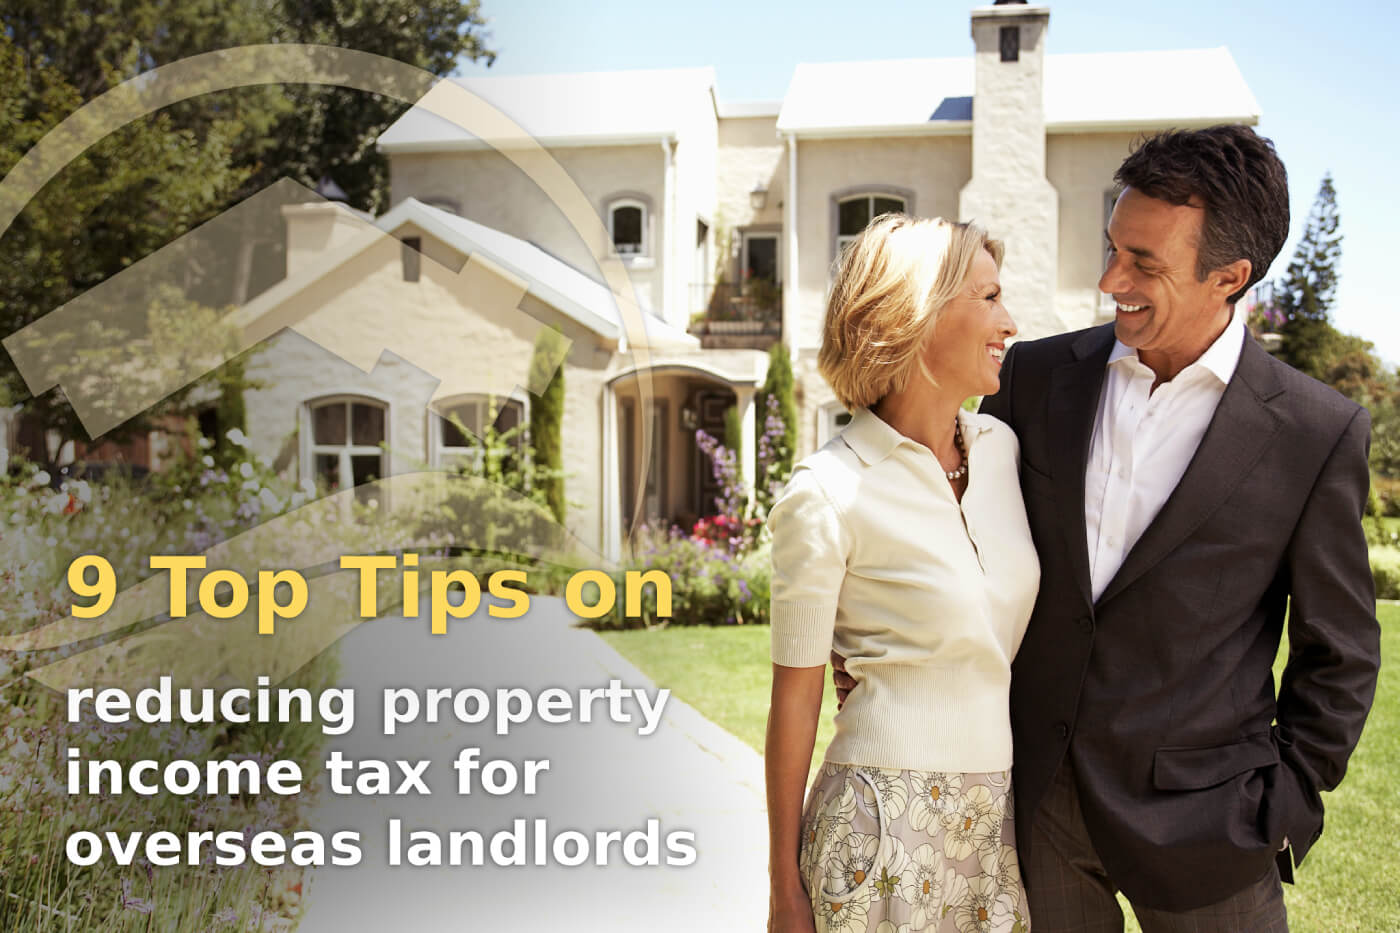 9 Top Tips on reducing property income tax for overseas landlords